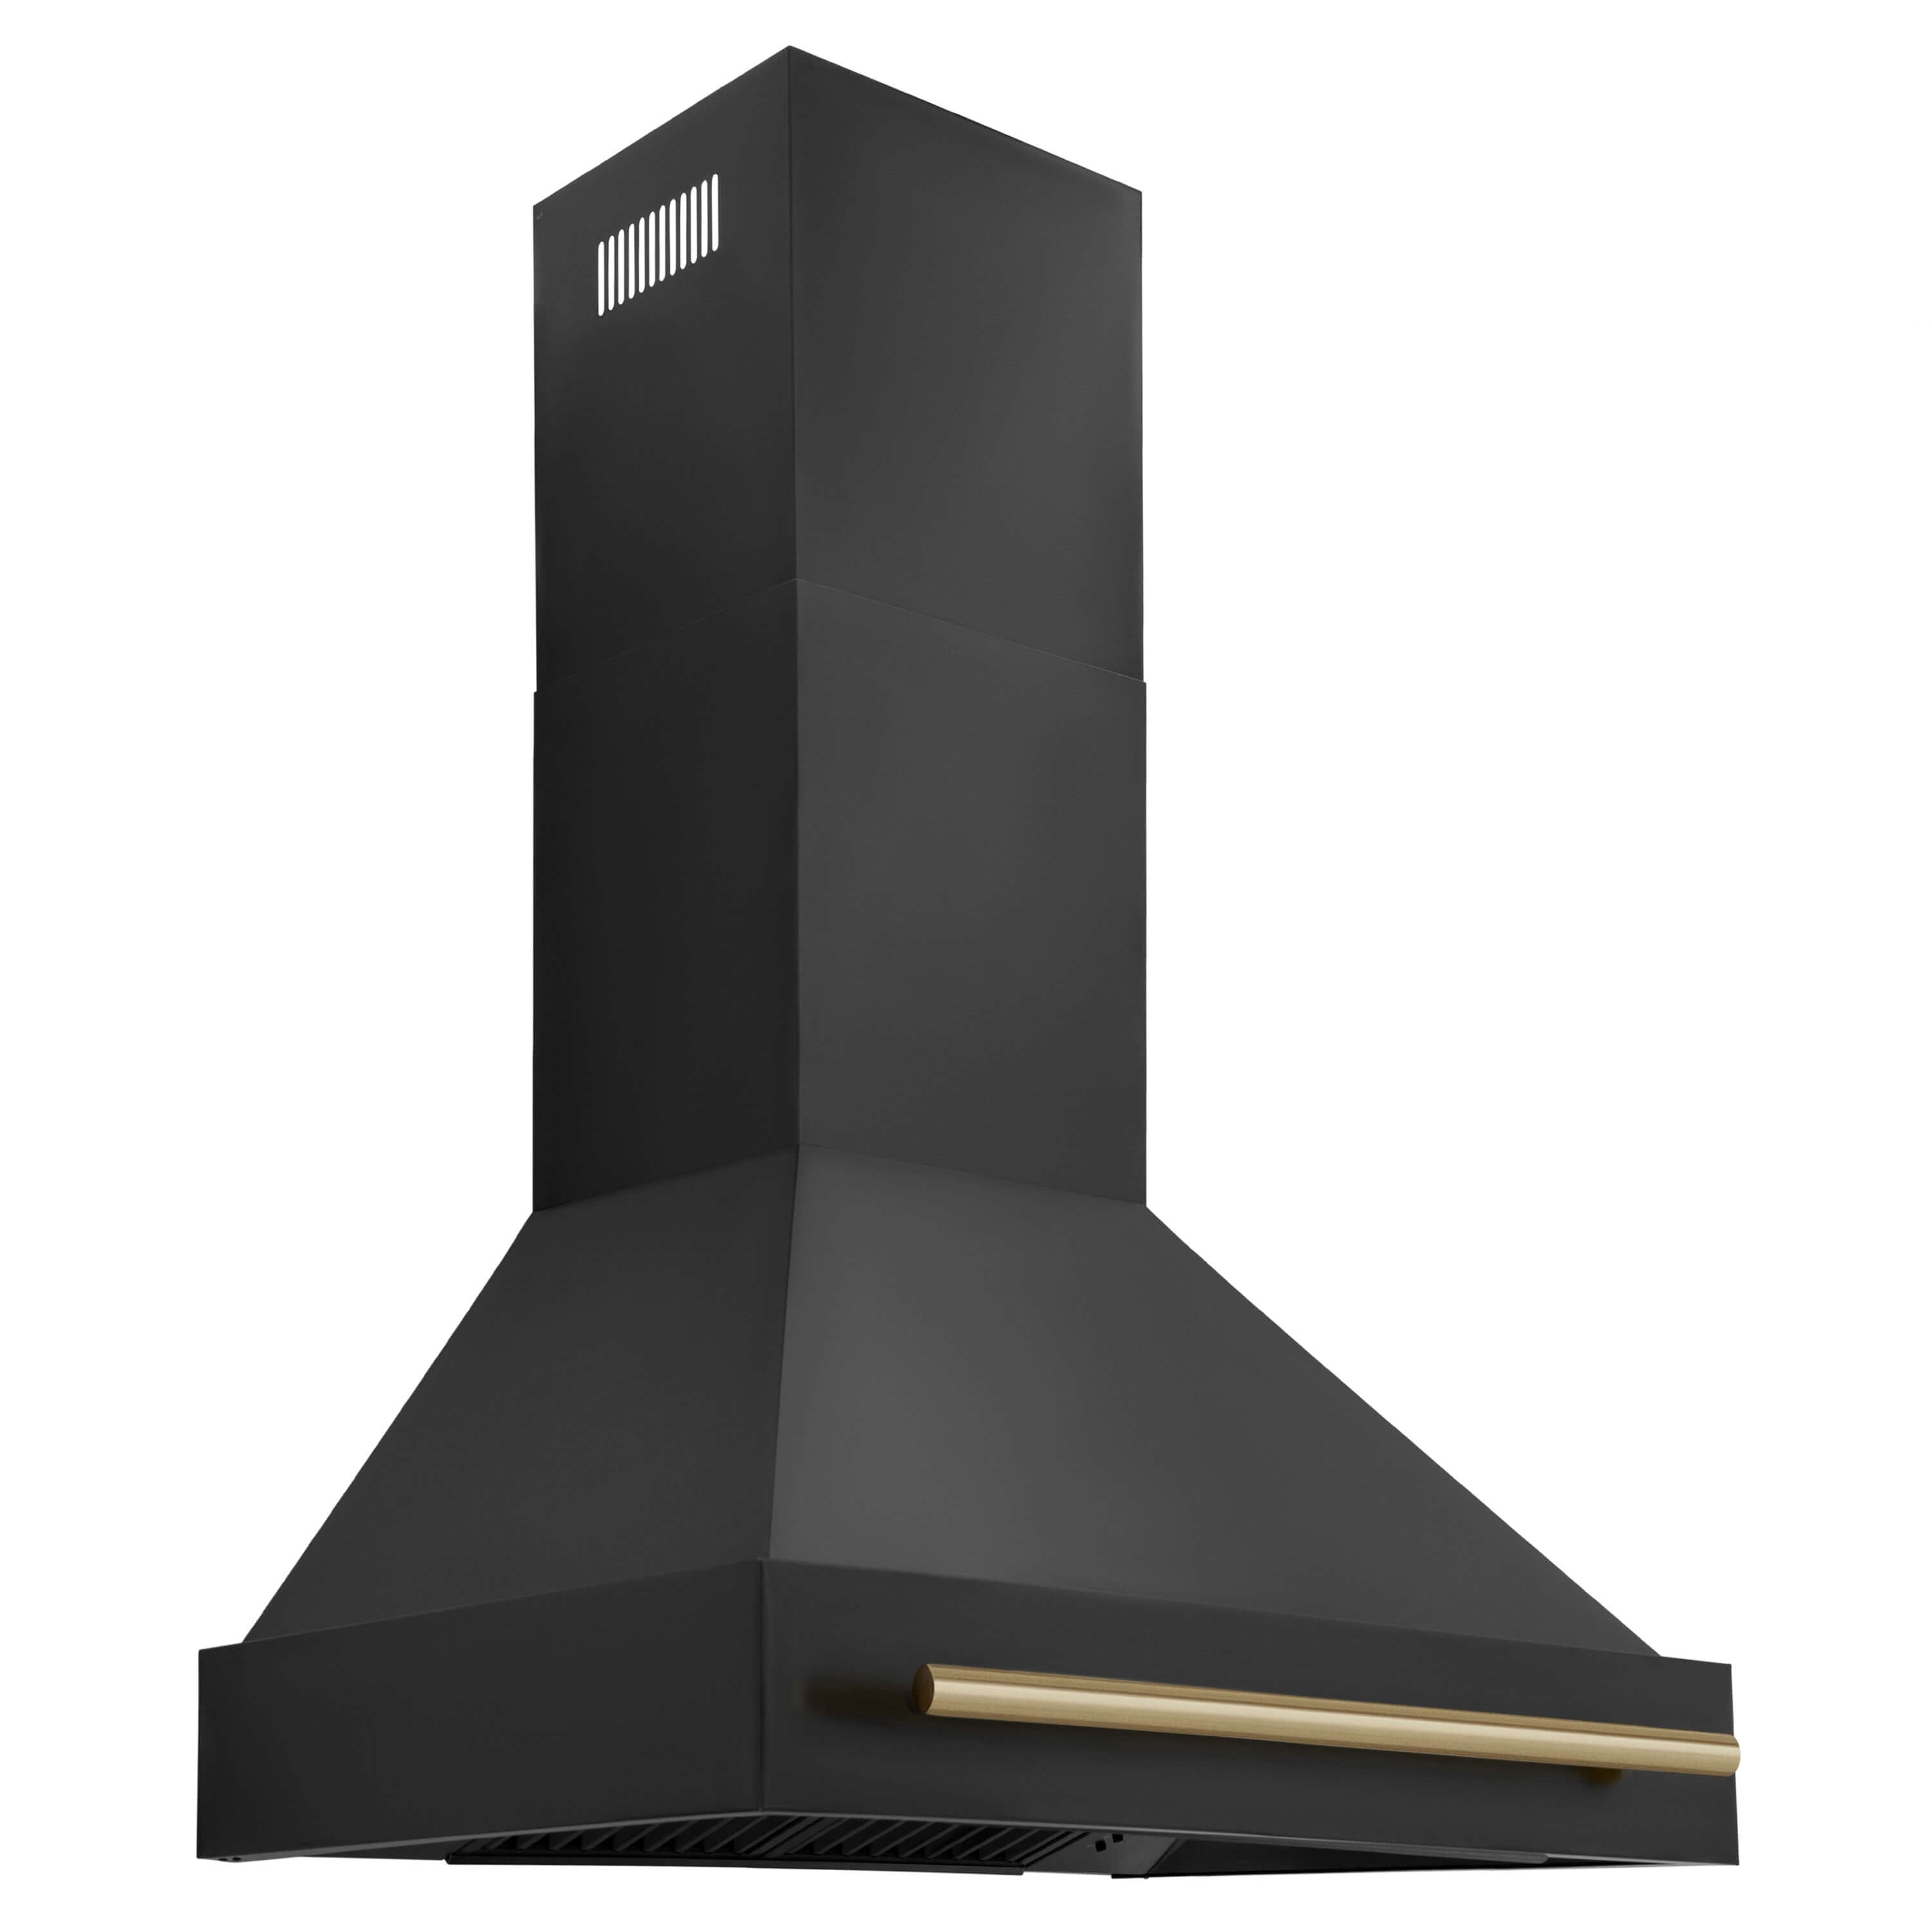 ZLINE 30" Autograph Edition Kitchen Package with Black Stainless Steel Dual Fuel Range and Range Hood with Champagne Bronze Accents (2AKP-RABRH30-CB)